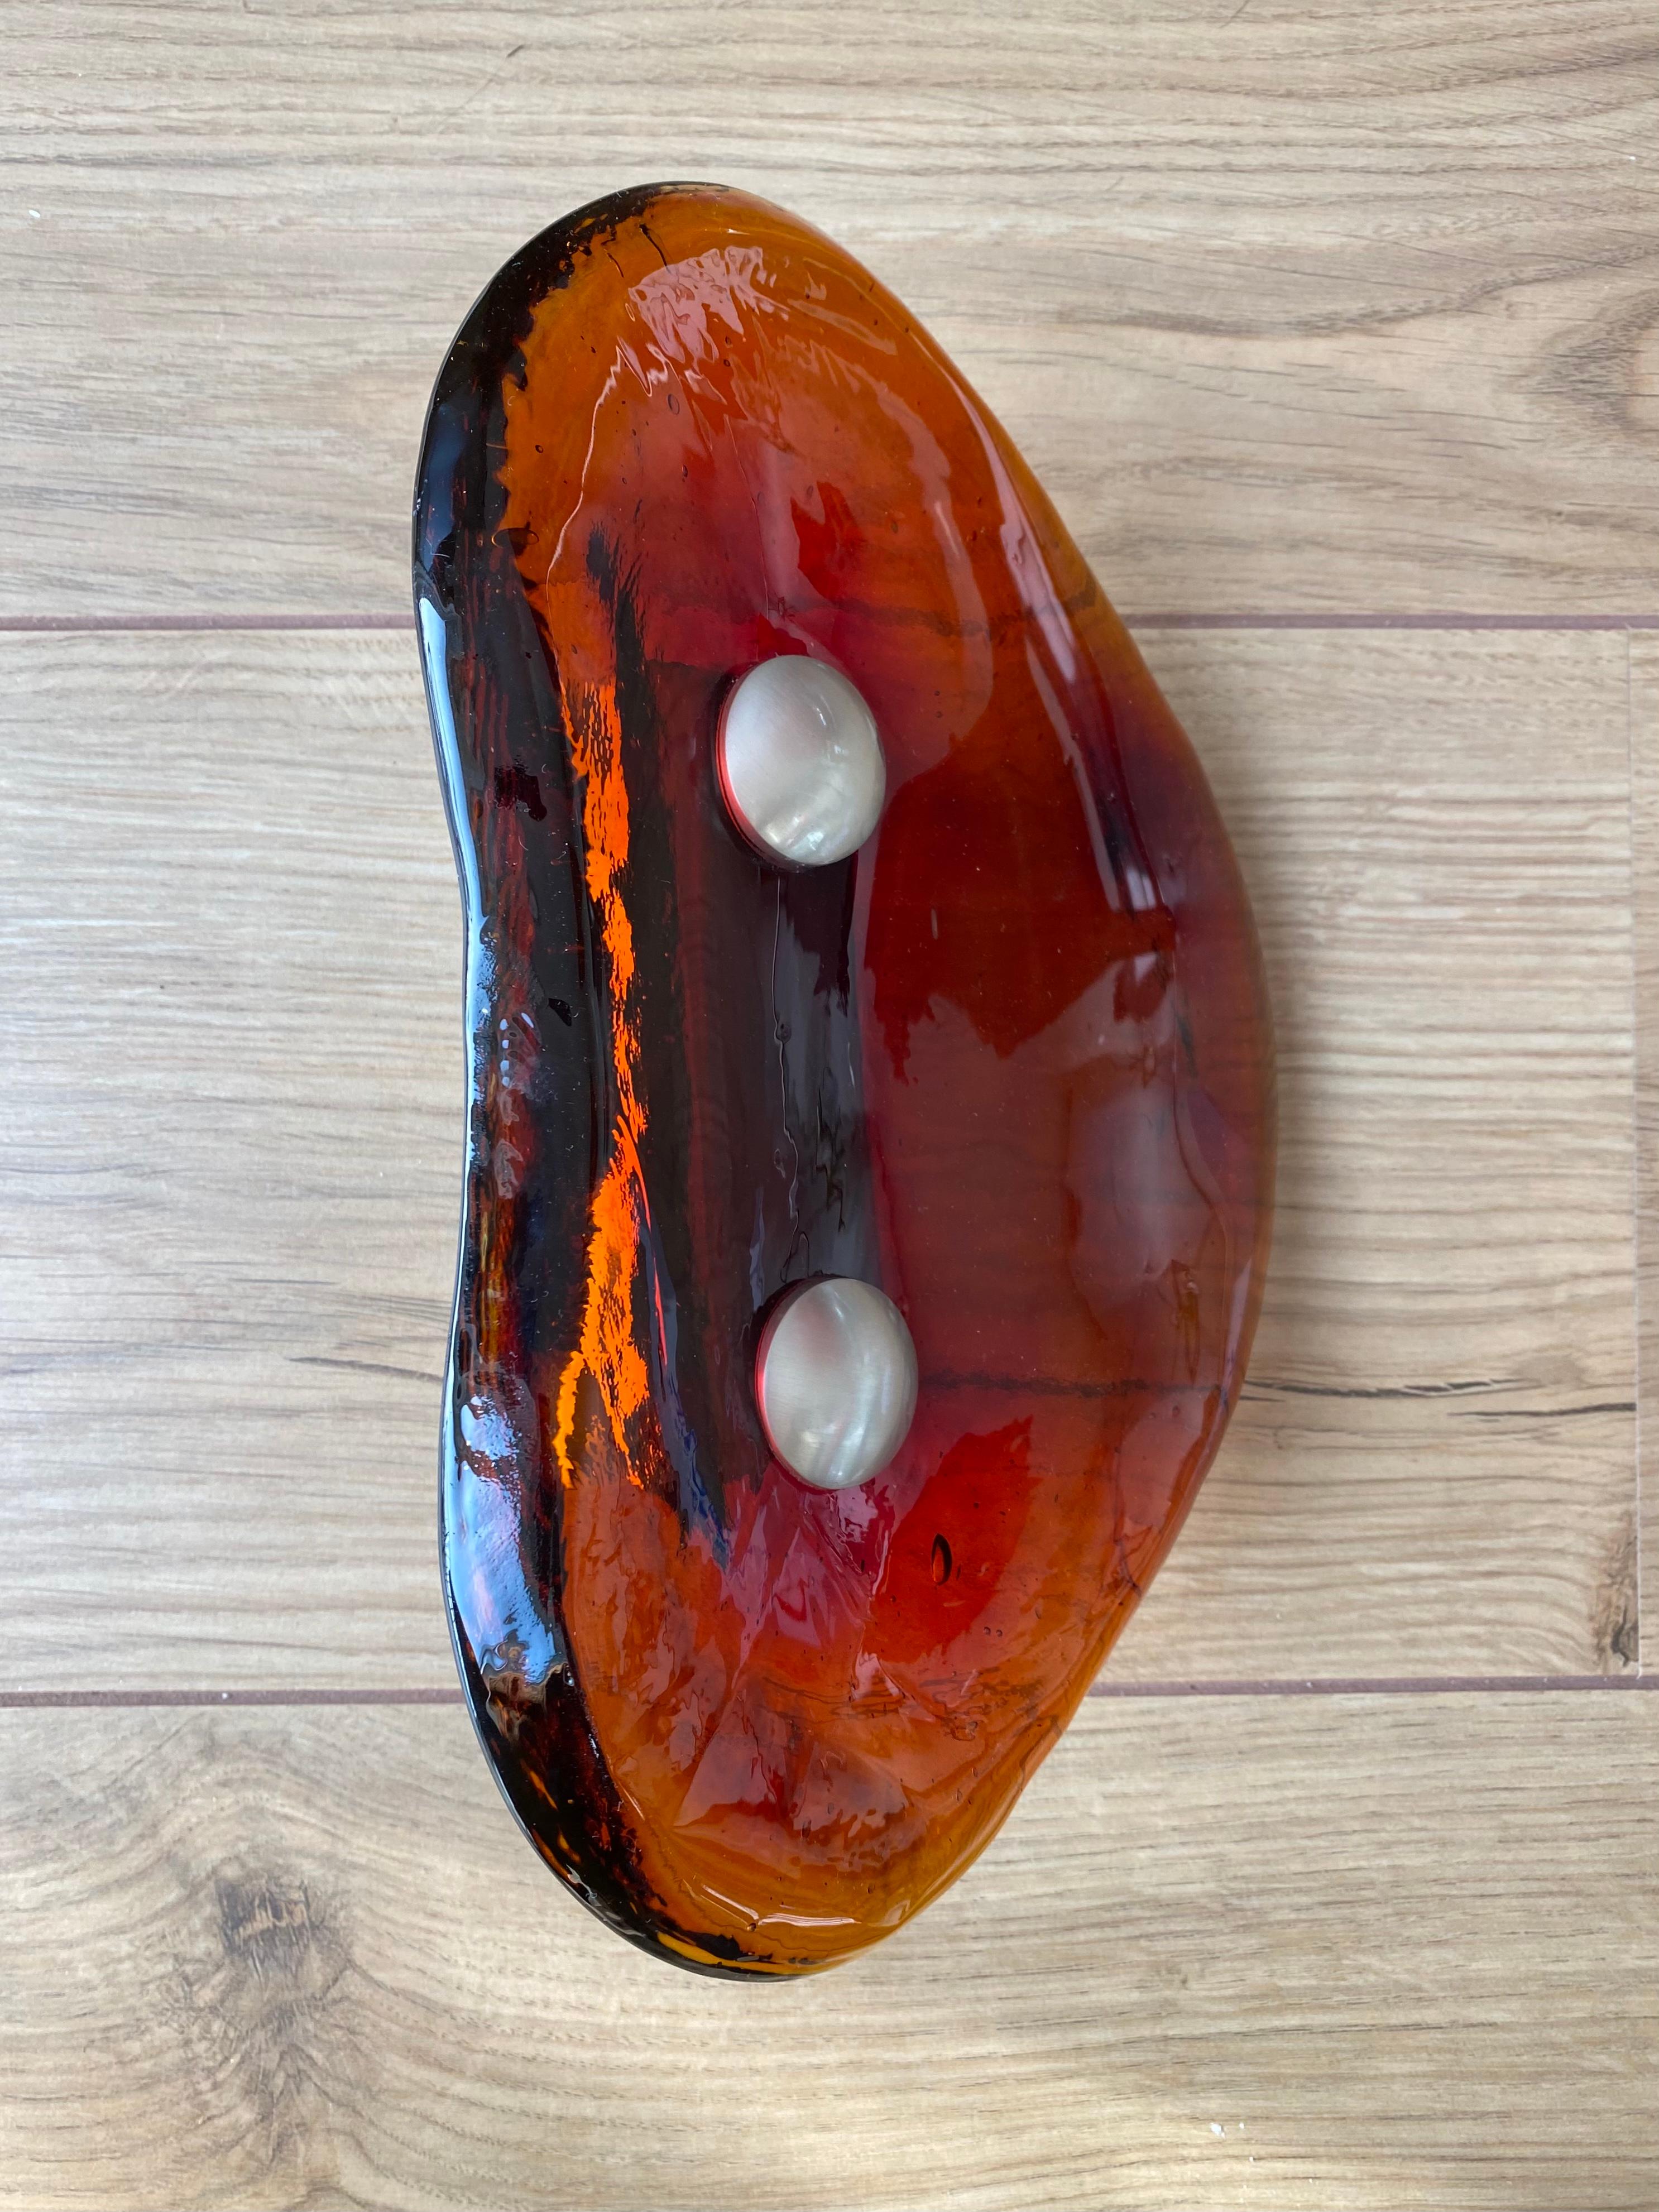 Absolut stunning piece made from thick, amber colored Murano or Art Glass. The metal part is imprinted ‘wss’. Rare European piece which is in very good condition. Would fit perfectly to the outside door of an excentrique house. Only minimal signs of